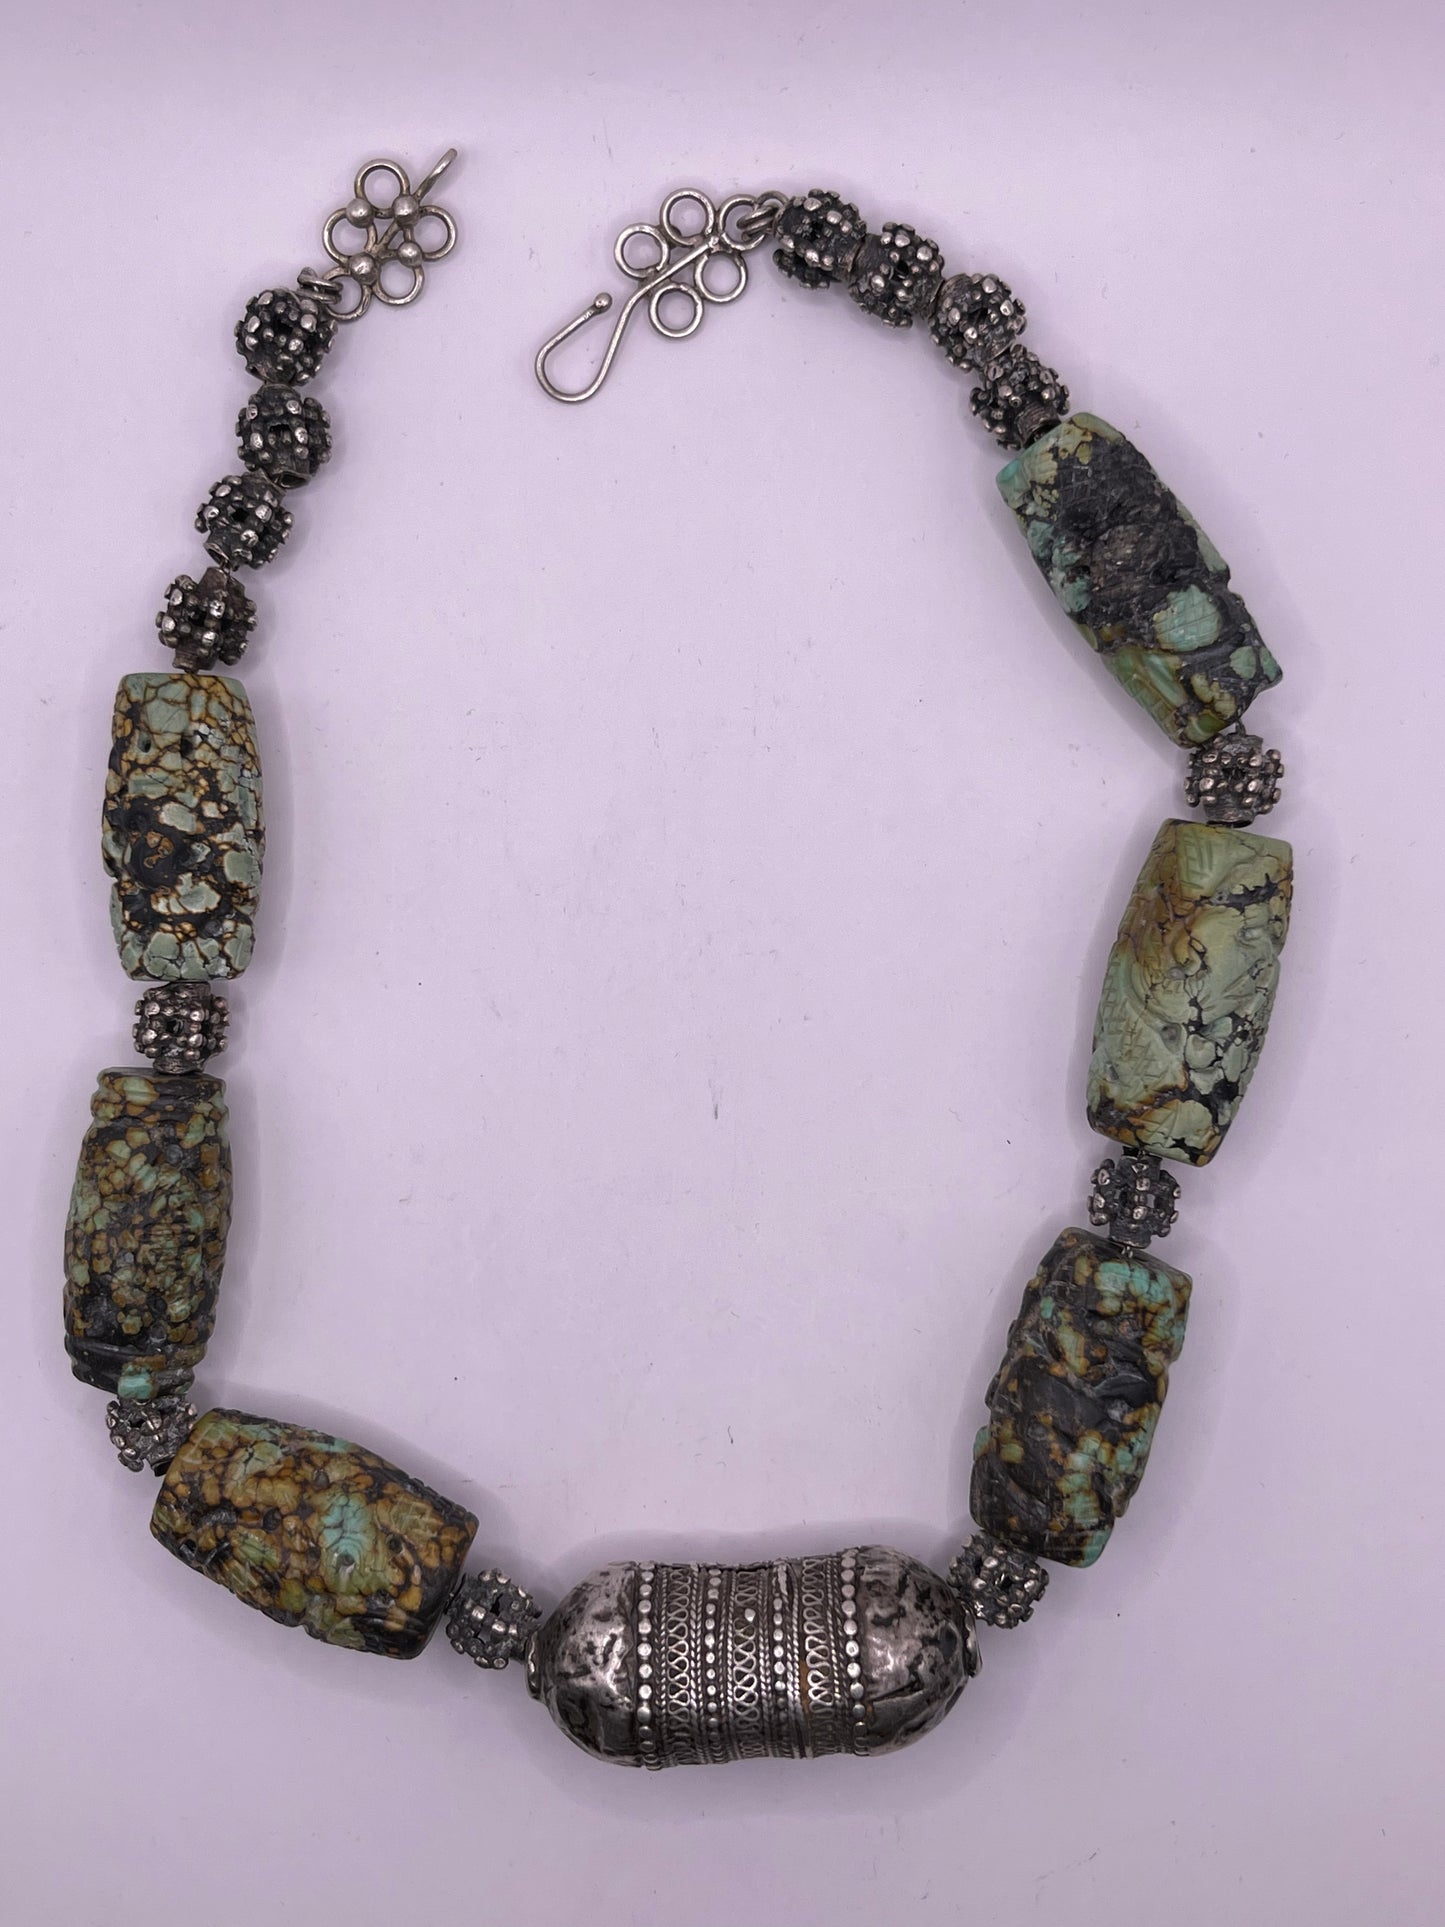 Vintage necklace with carved turquoise beads and antique silver beads